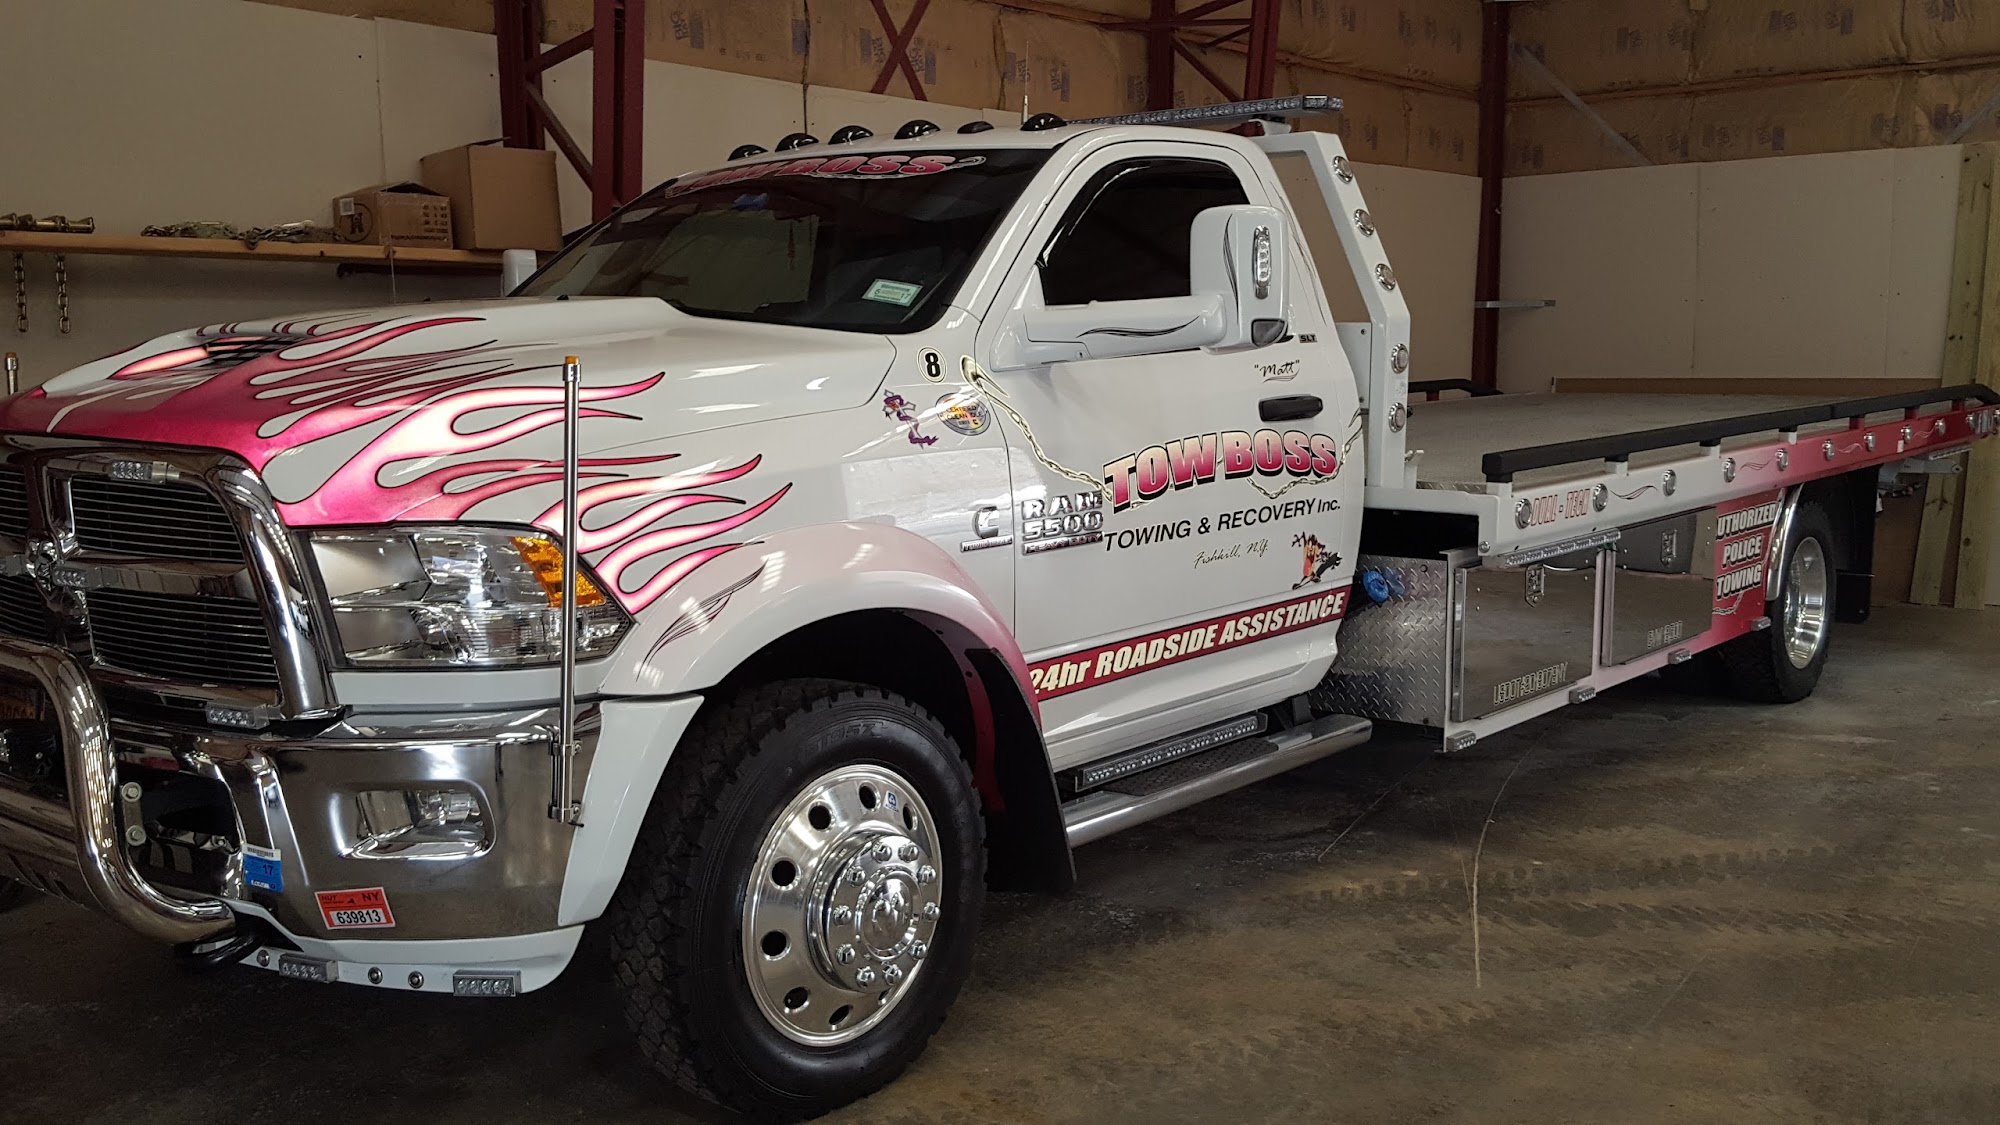 Tow Boss Towing & Recovery Inc.